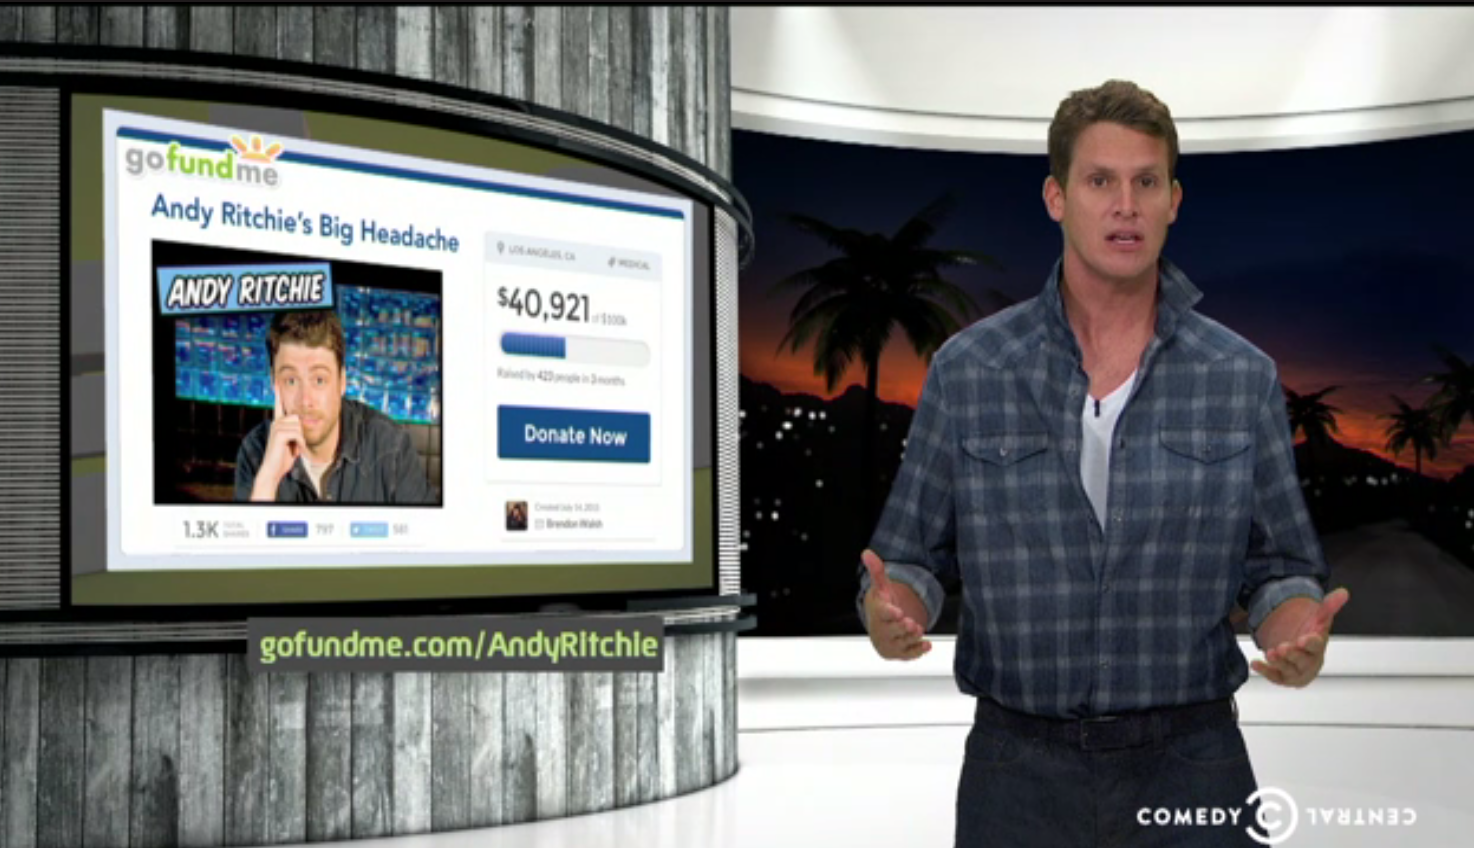 Daniel Tosh raises $25,000 for Andy Ritchie’s medical bills, doubles down betting it on football